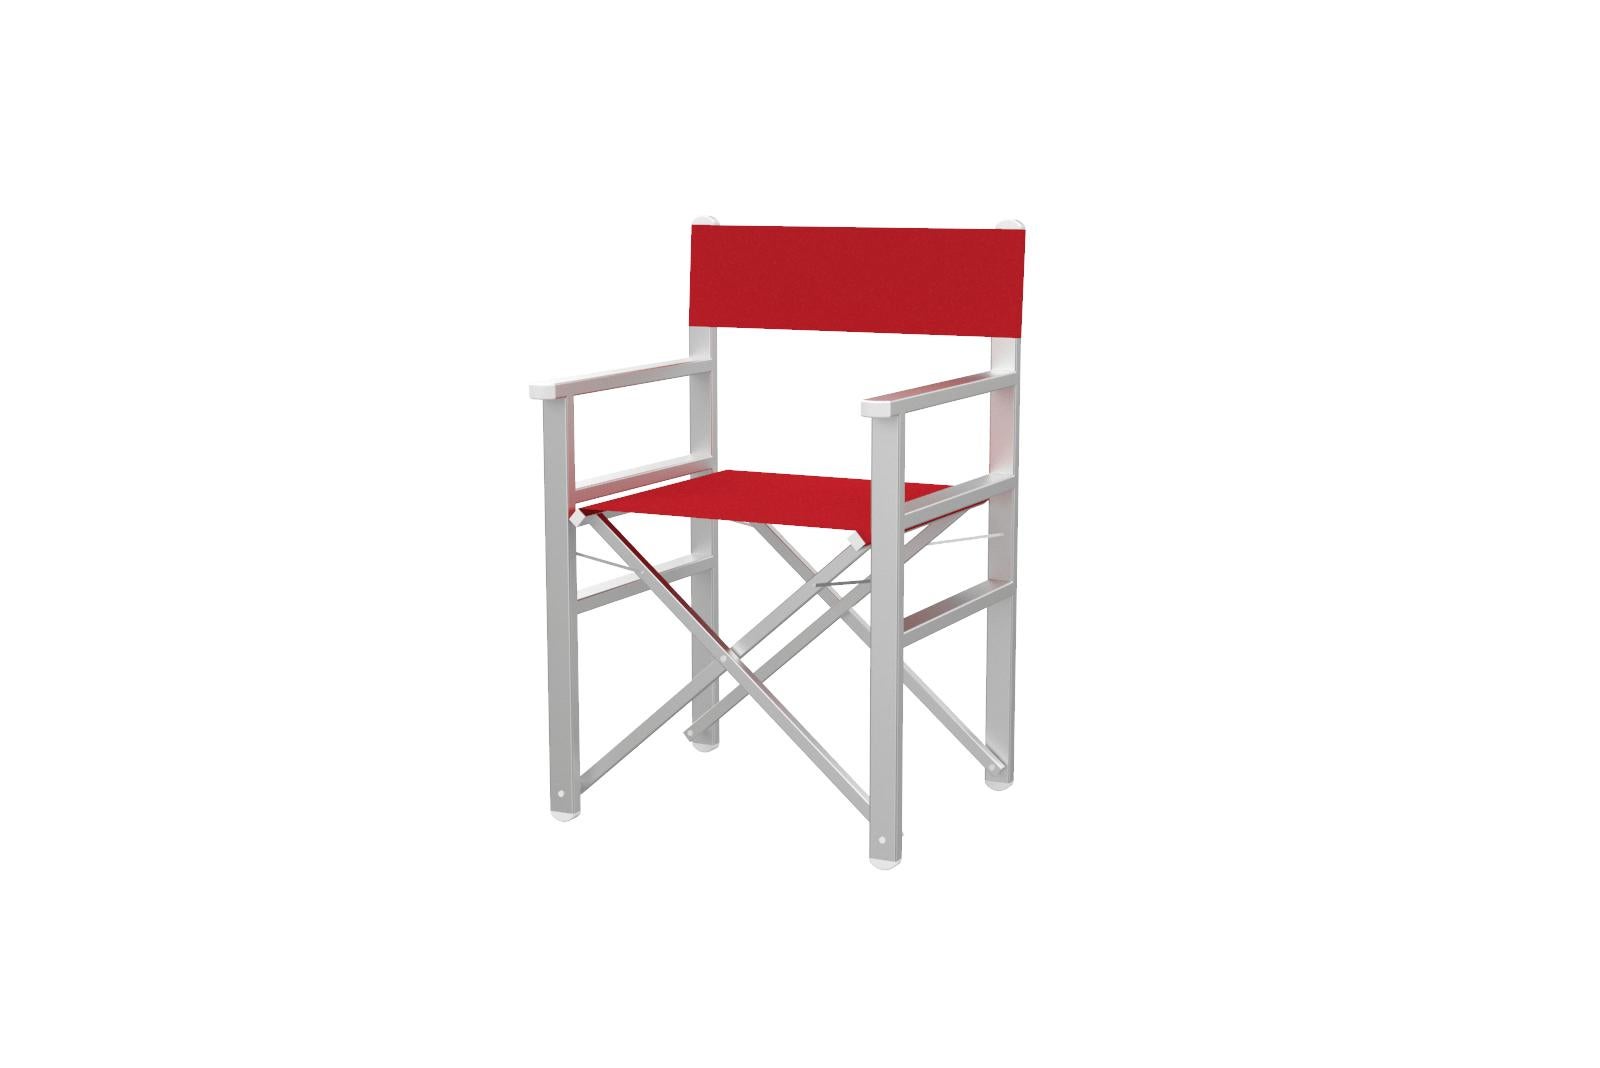 Calipso red/white outdoor director's armchair
In Stock in Los Angeles

Folding red/white aluminum outdoor chair in aluminium, finished in white powder coating. Anodized aluminum frame, stainless steel nuts and bolts, “textilene” sheet in PVC